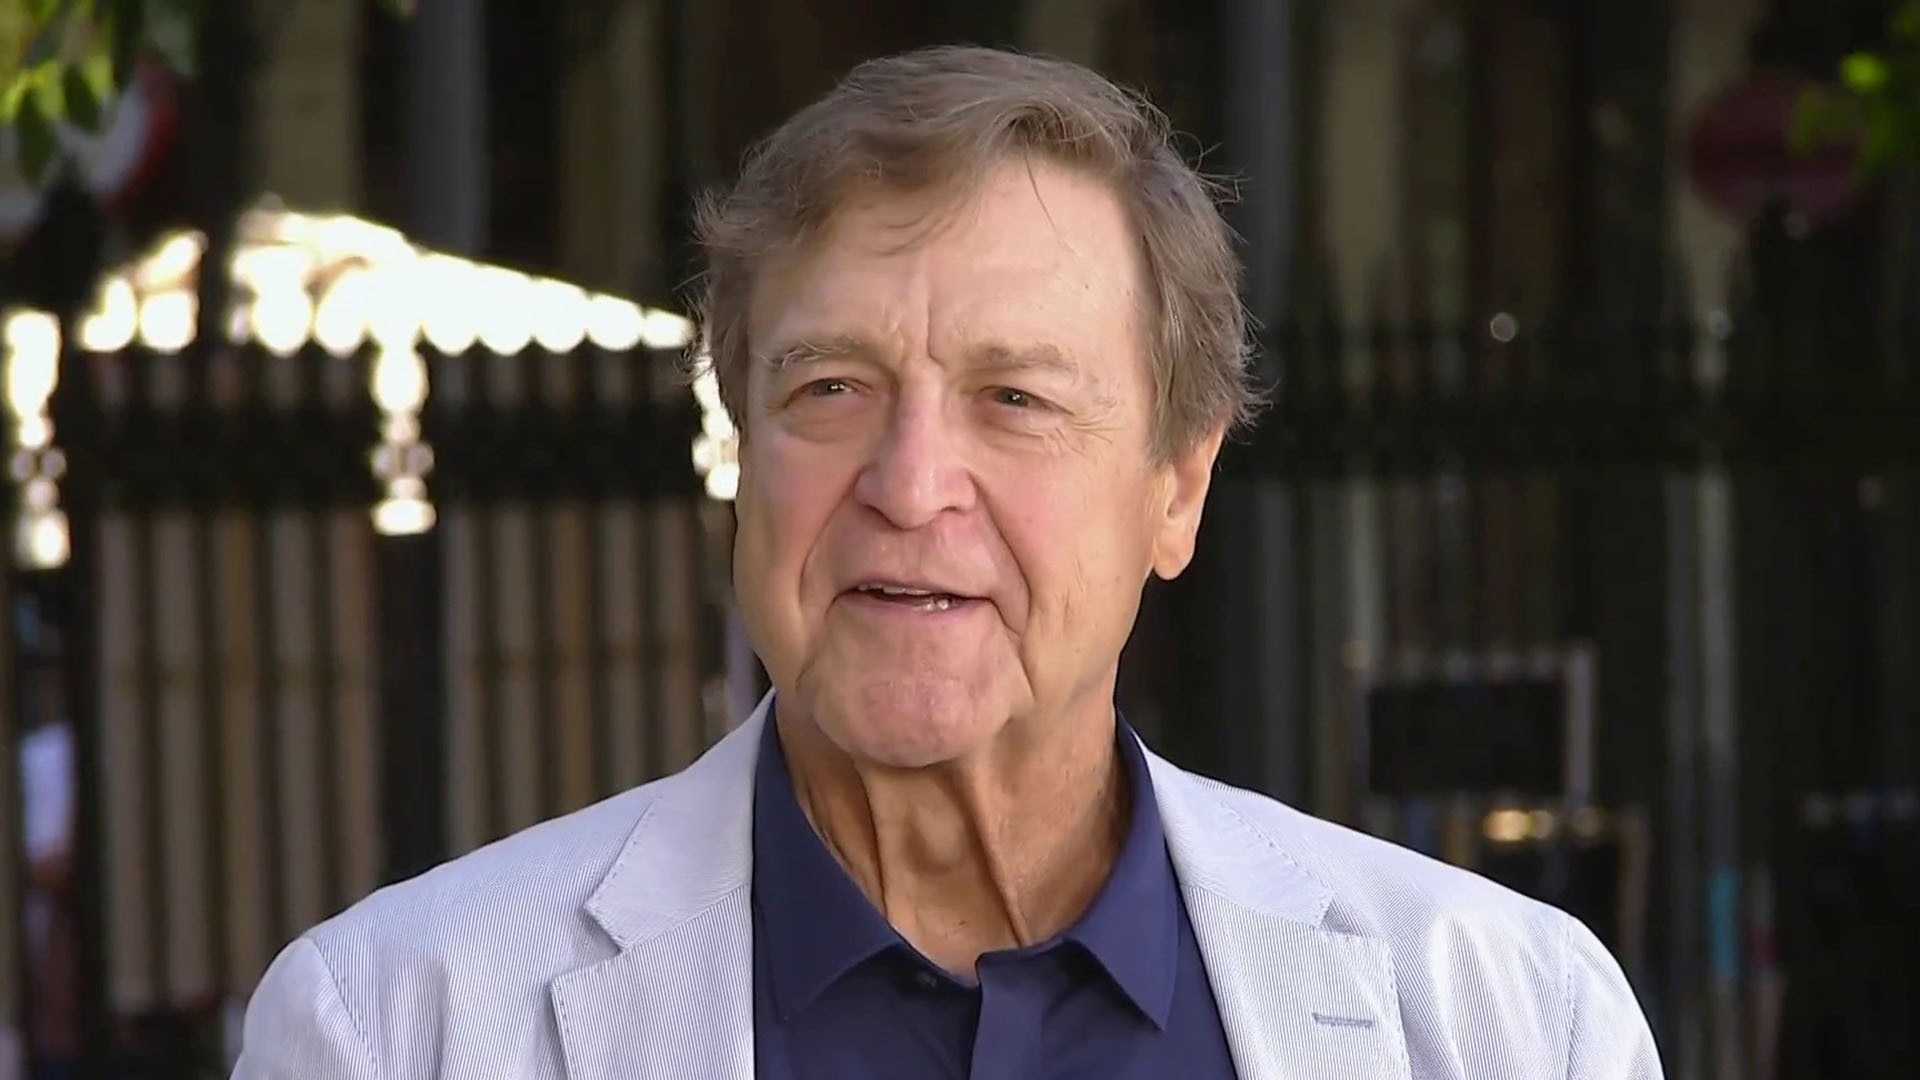 Watch TODAY Excerpt John Goodman talks living in New Orleans, ghostly